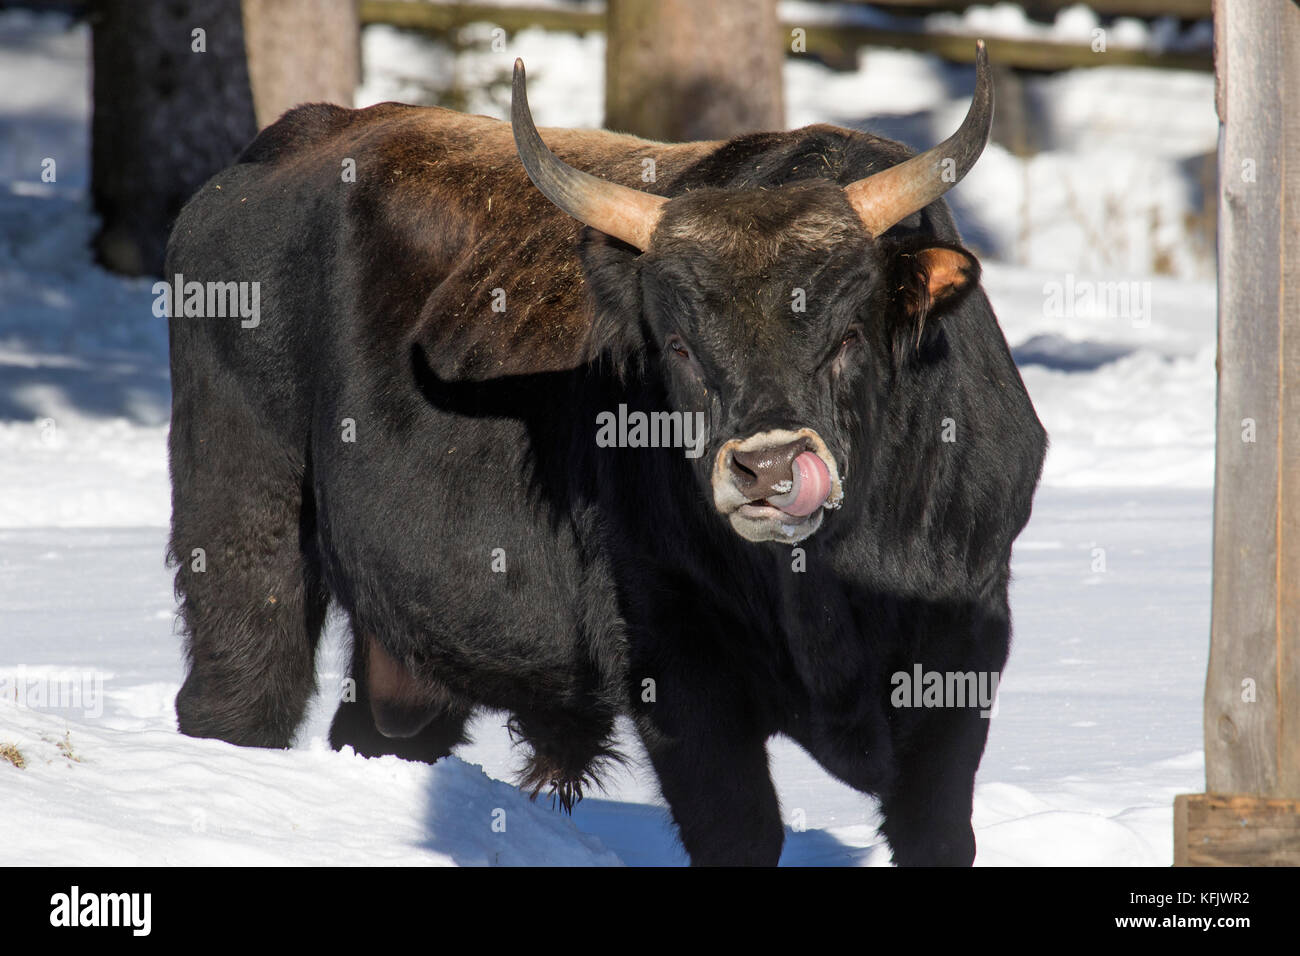 Heck cattle (Bos domesticus) bull licking nose in the snow in winter Stock Photo